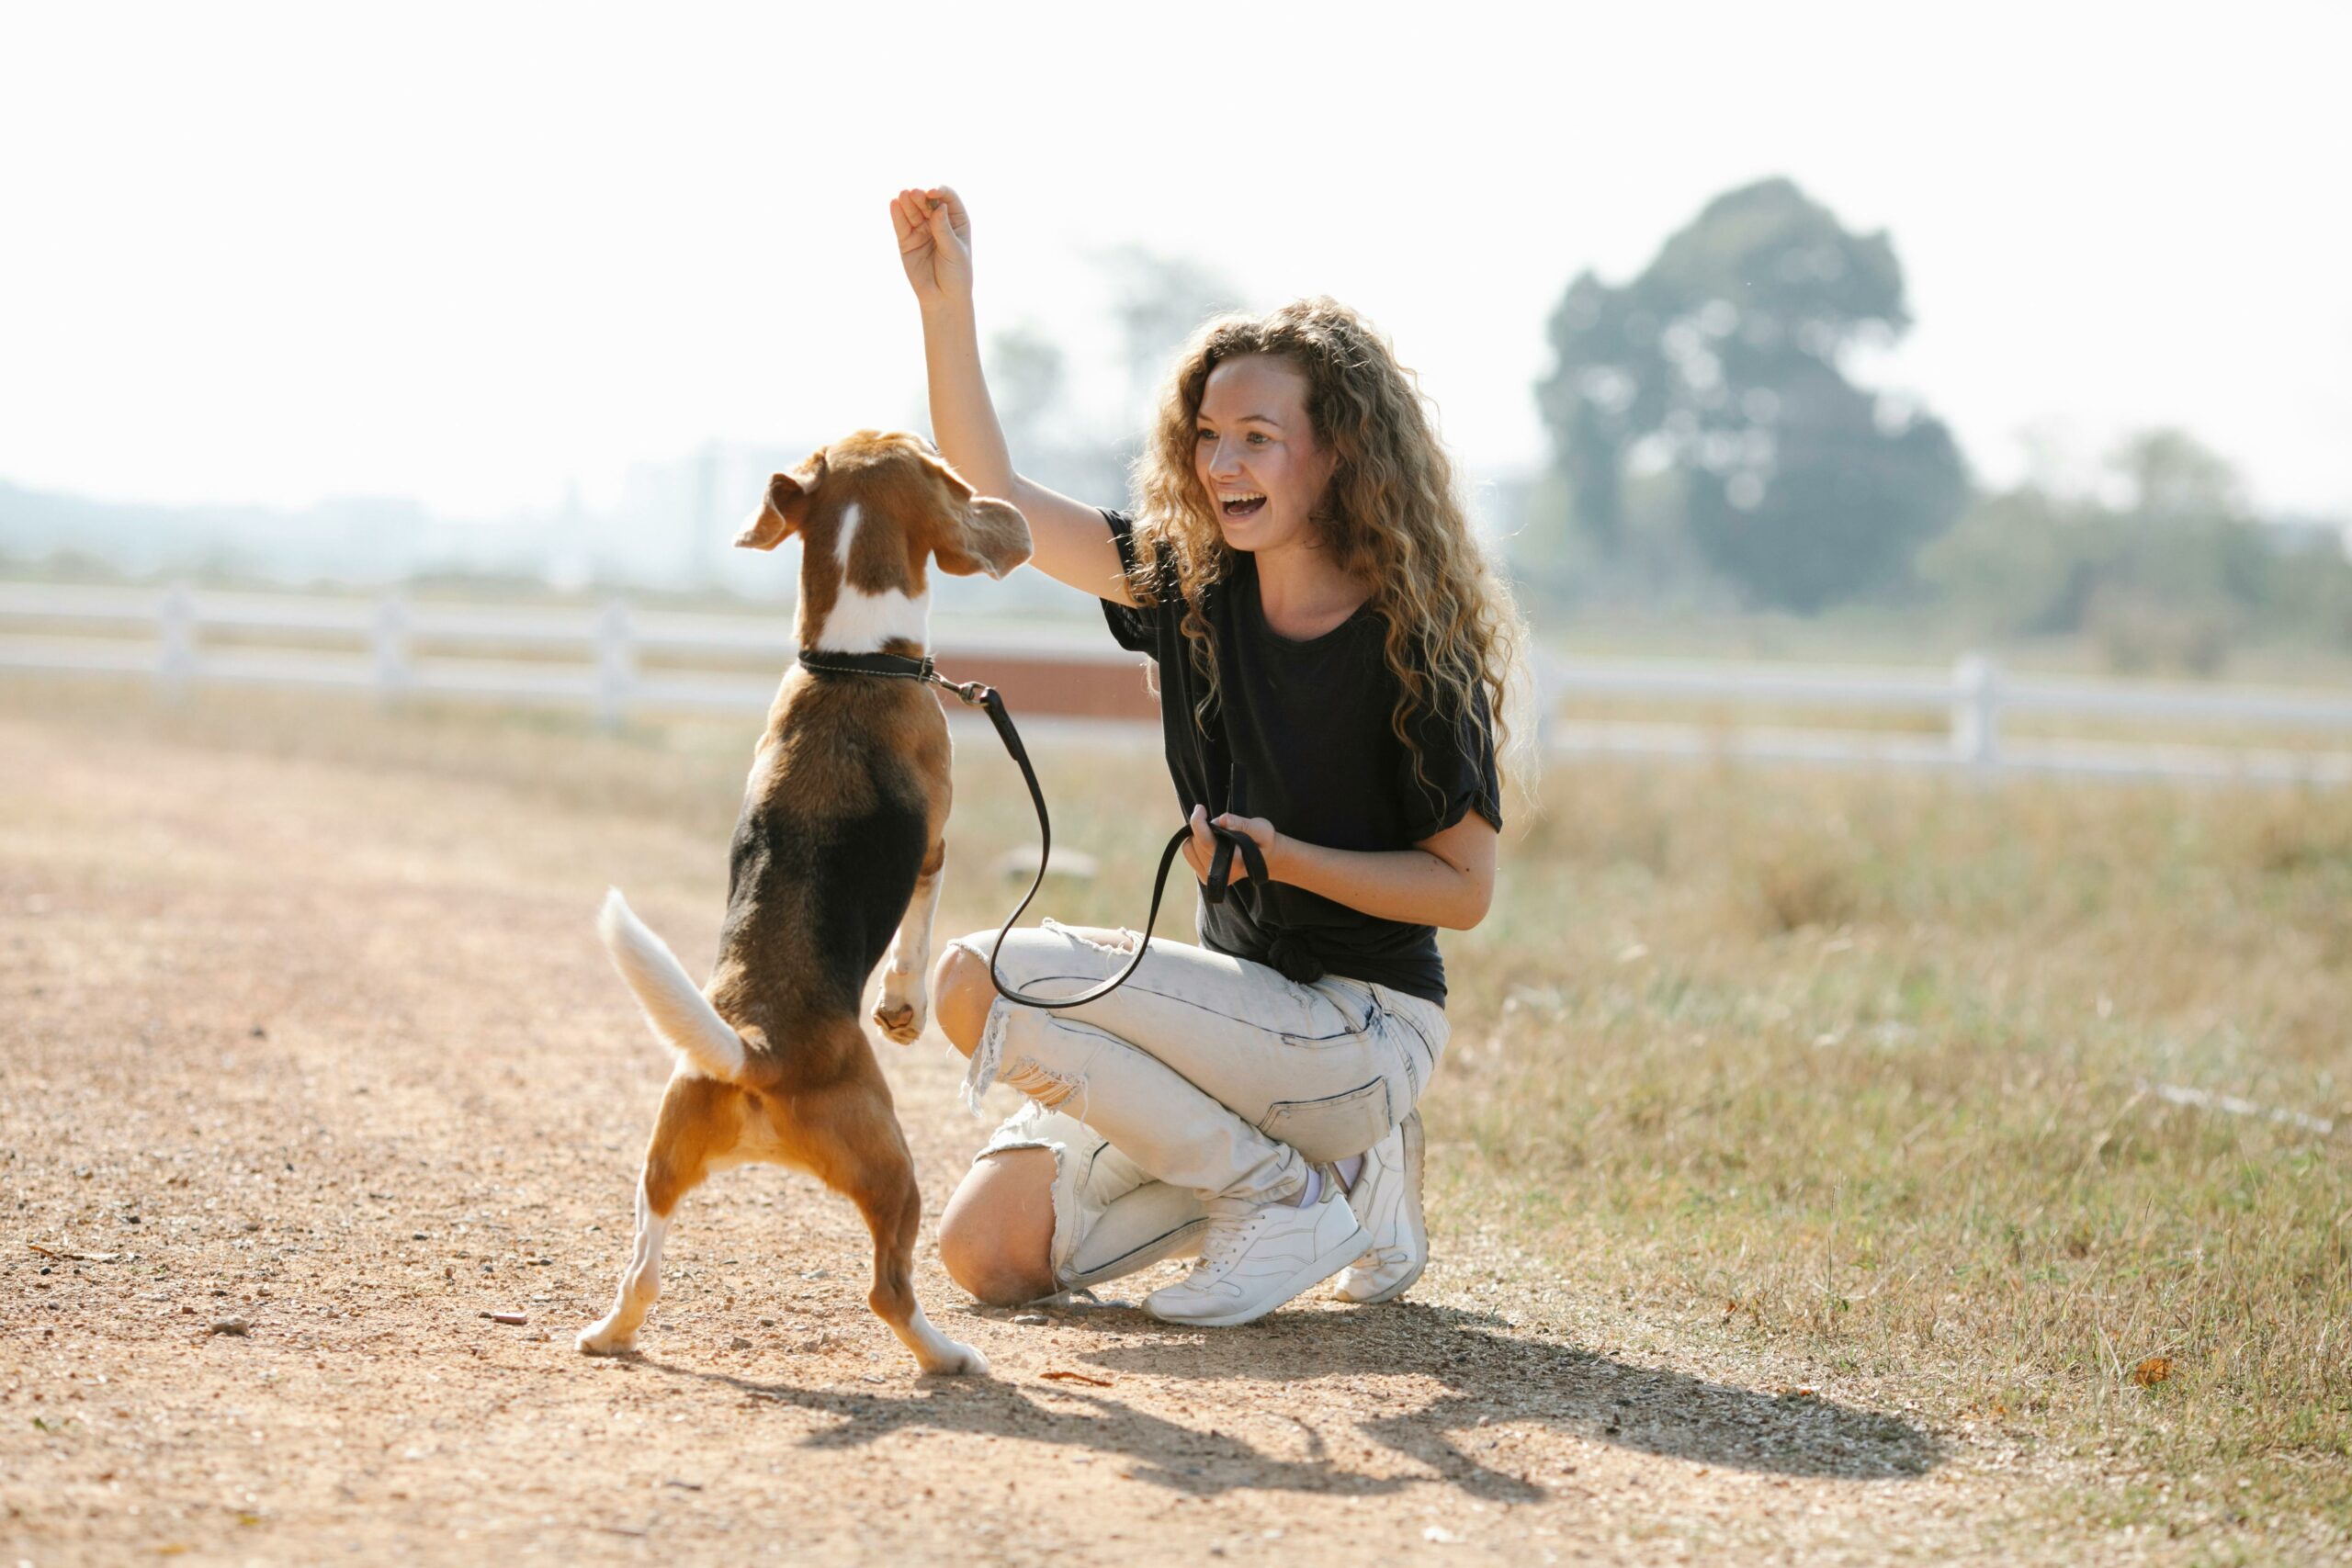 What Is An Example Of Positive Reinforcement In Dog Training?